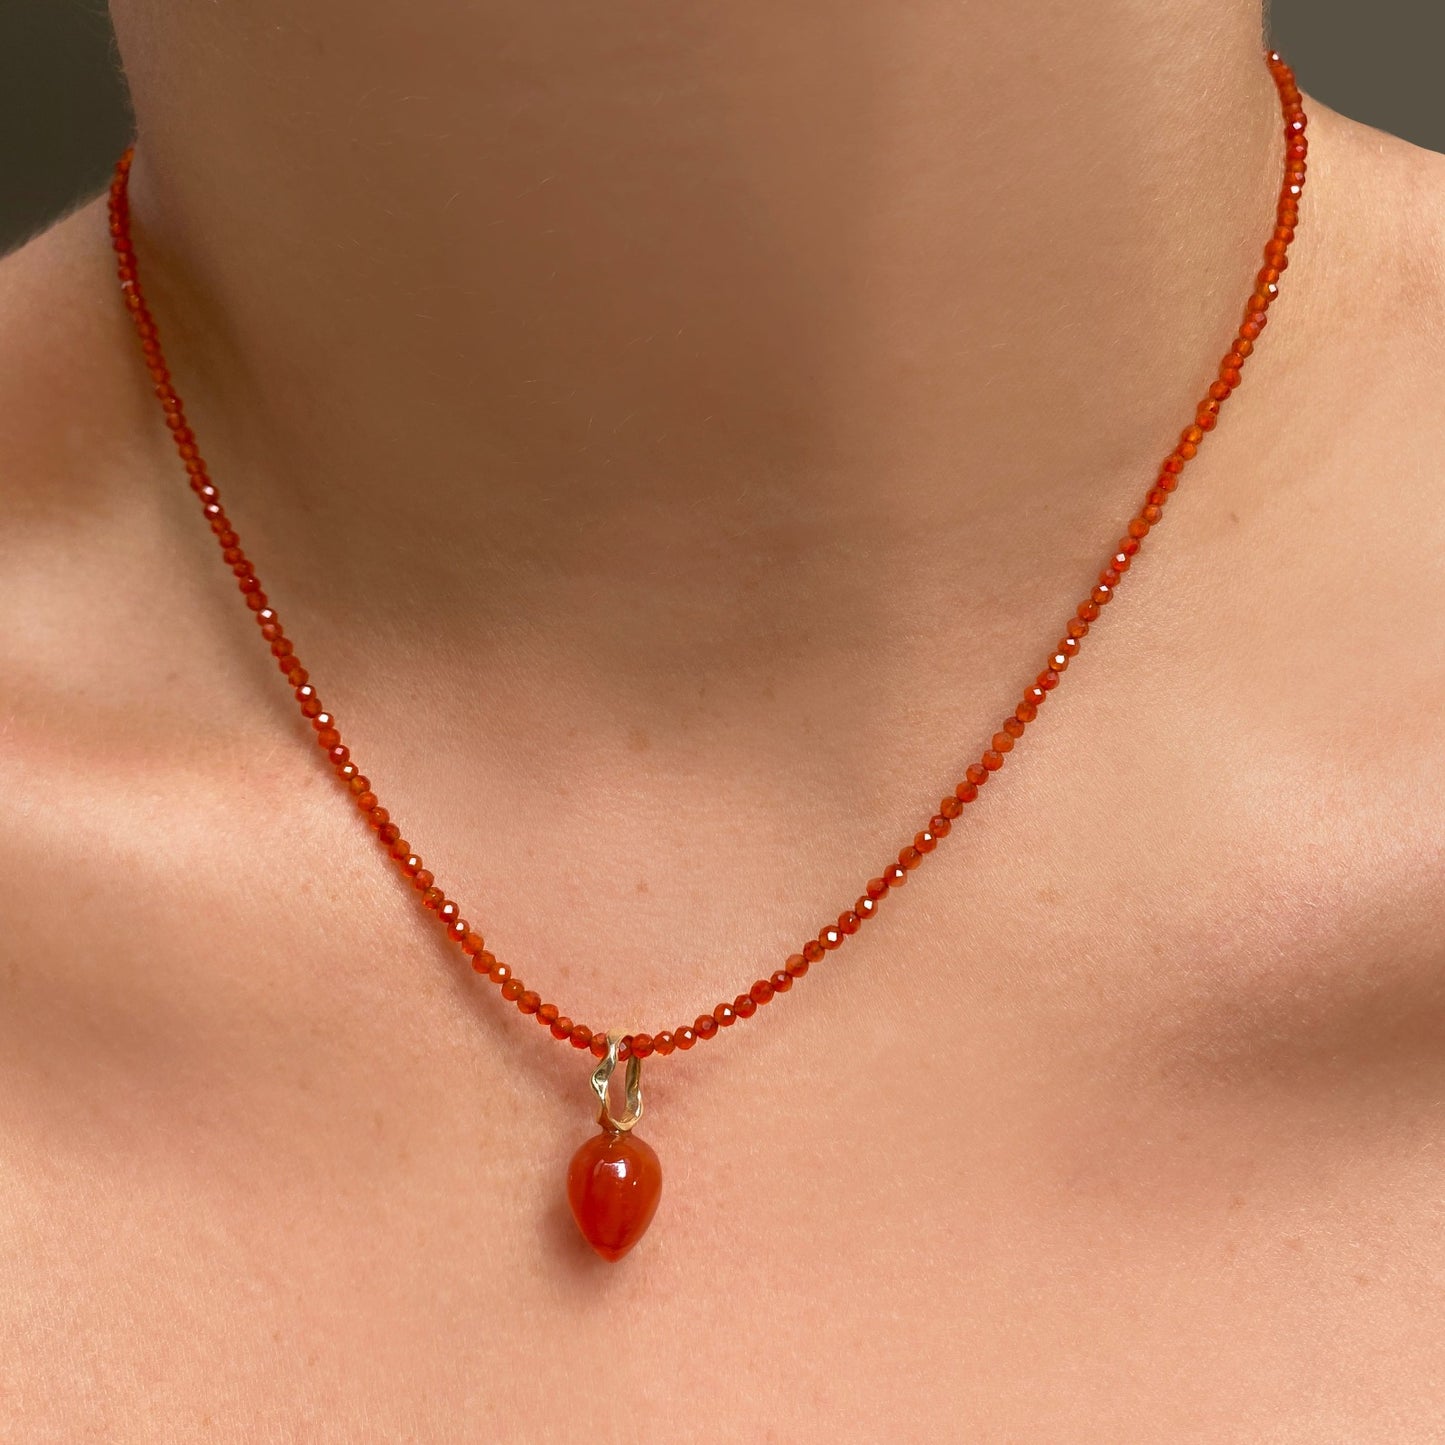 Shimmering beaded necklace made of 2mm faceted opals in shades of orange on a gold linking lobster clasp. Styled on a neck with an acorn drop charm.